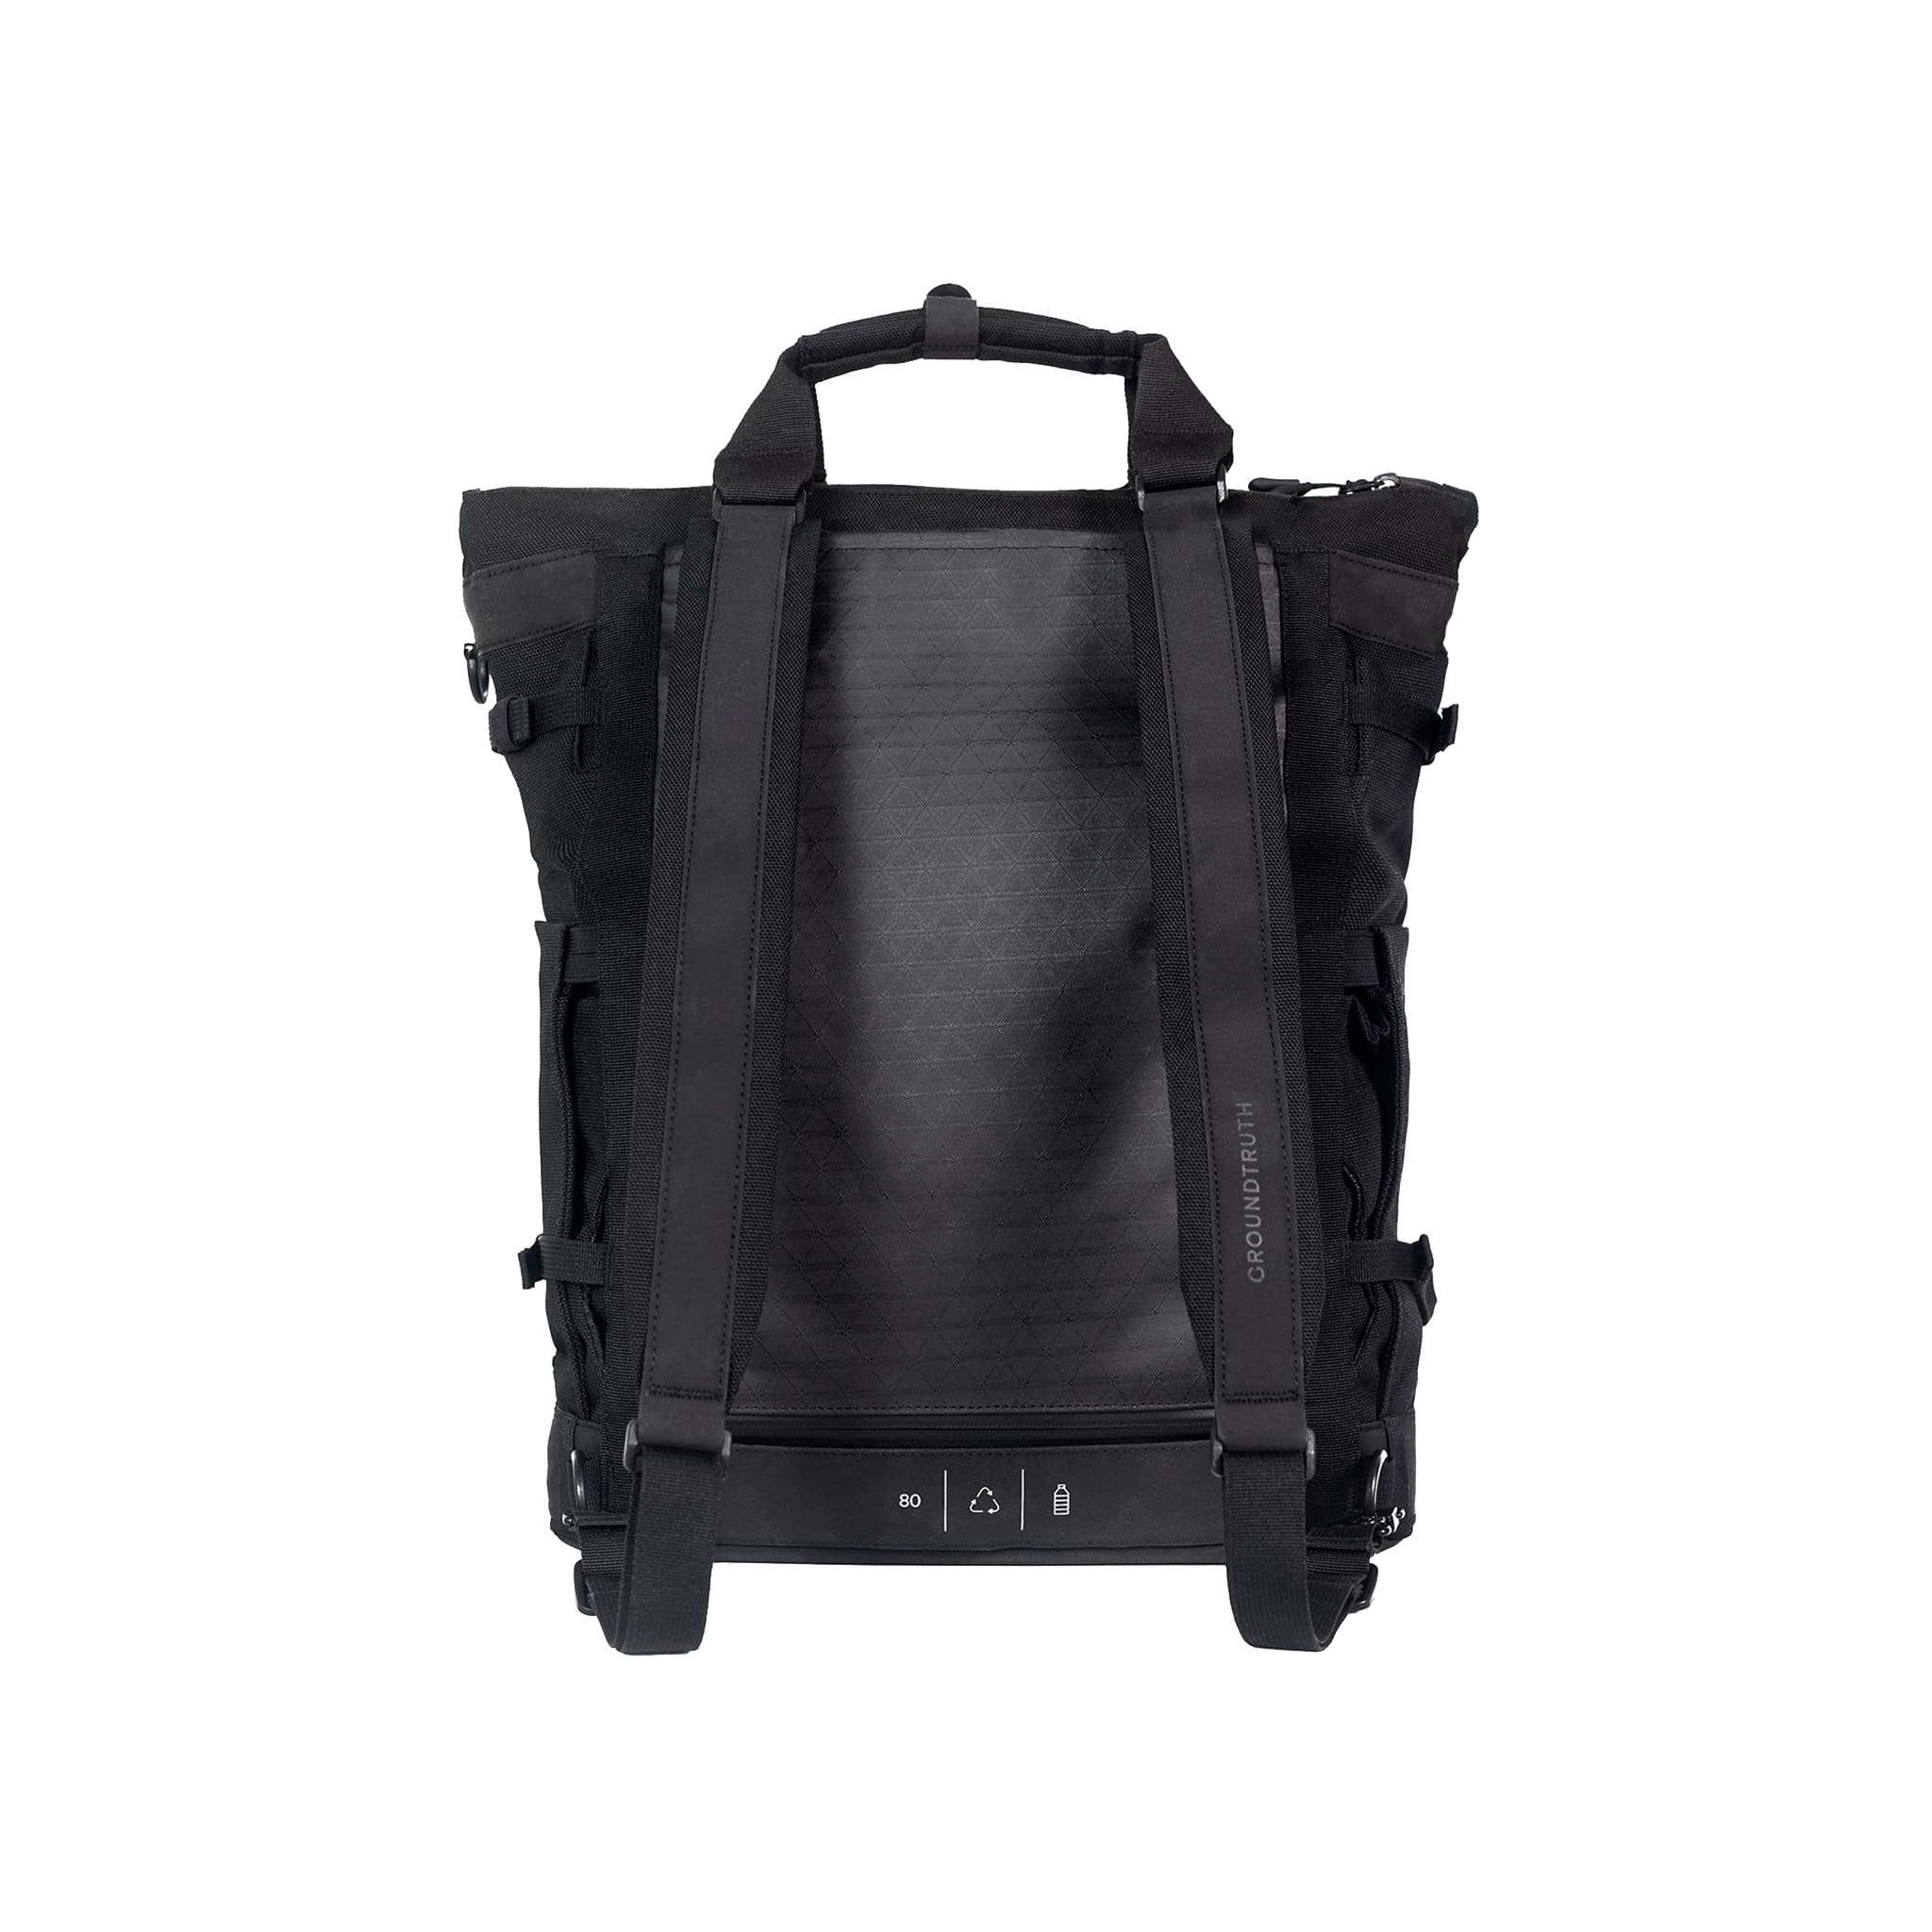 Carry your gadgets globally with GROUNDTRUTH’s bags and accessories merging fashion and technical innovation, in collaboration with RIKR and OceanBottle